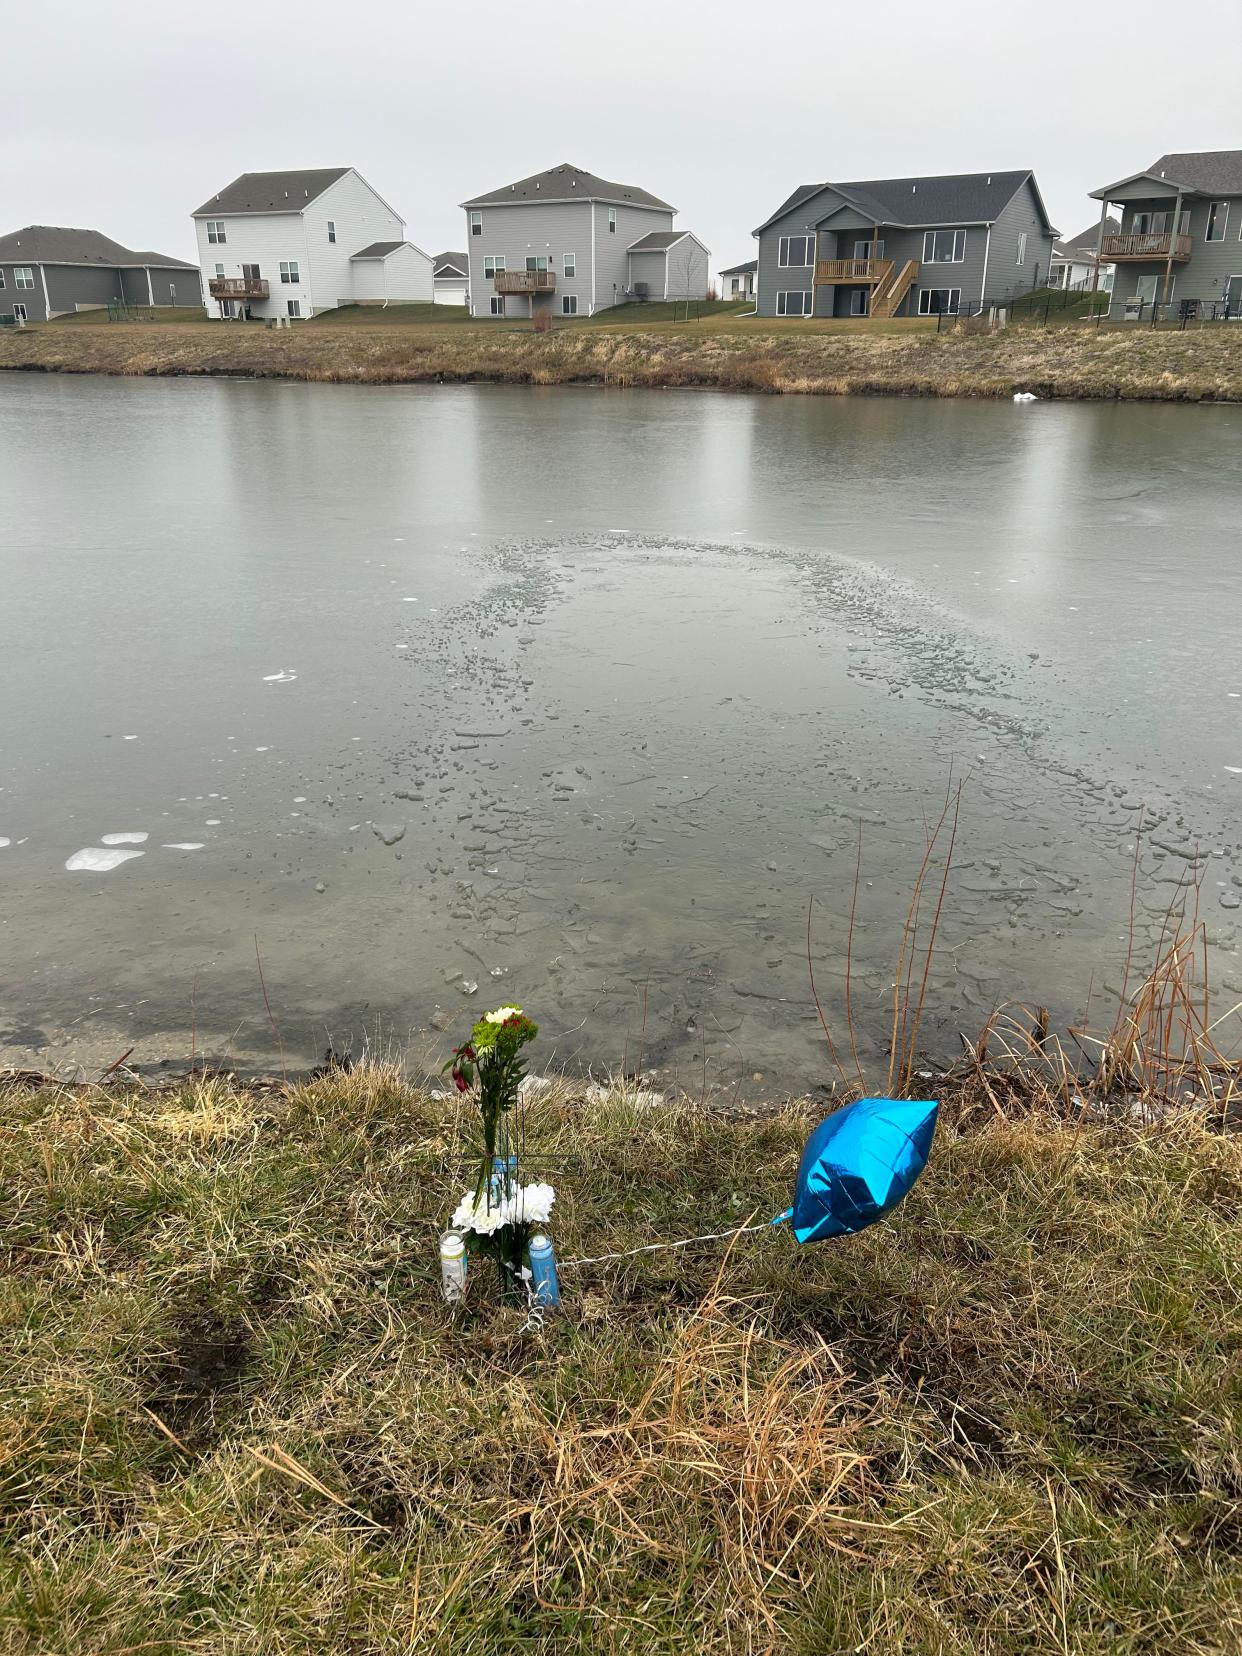 The icy pond, where Aiden James-Harrison Smith fell through.